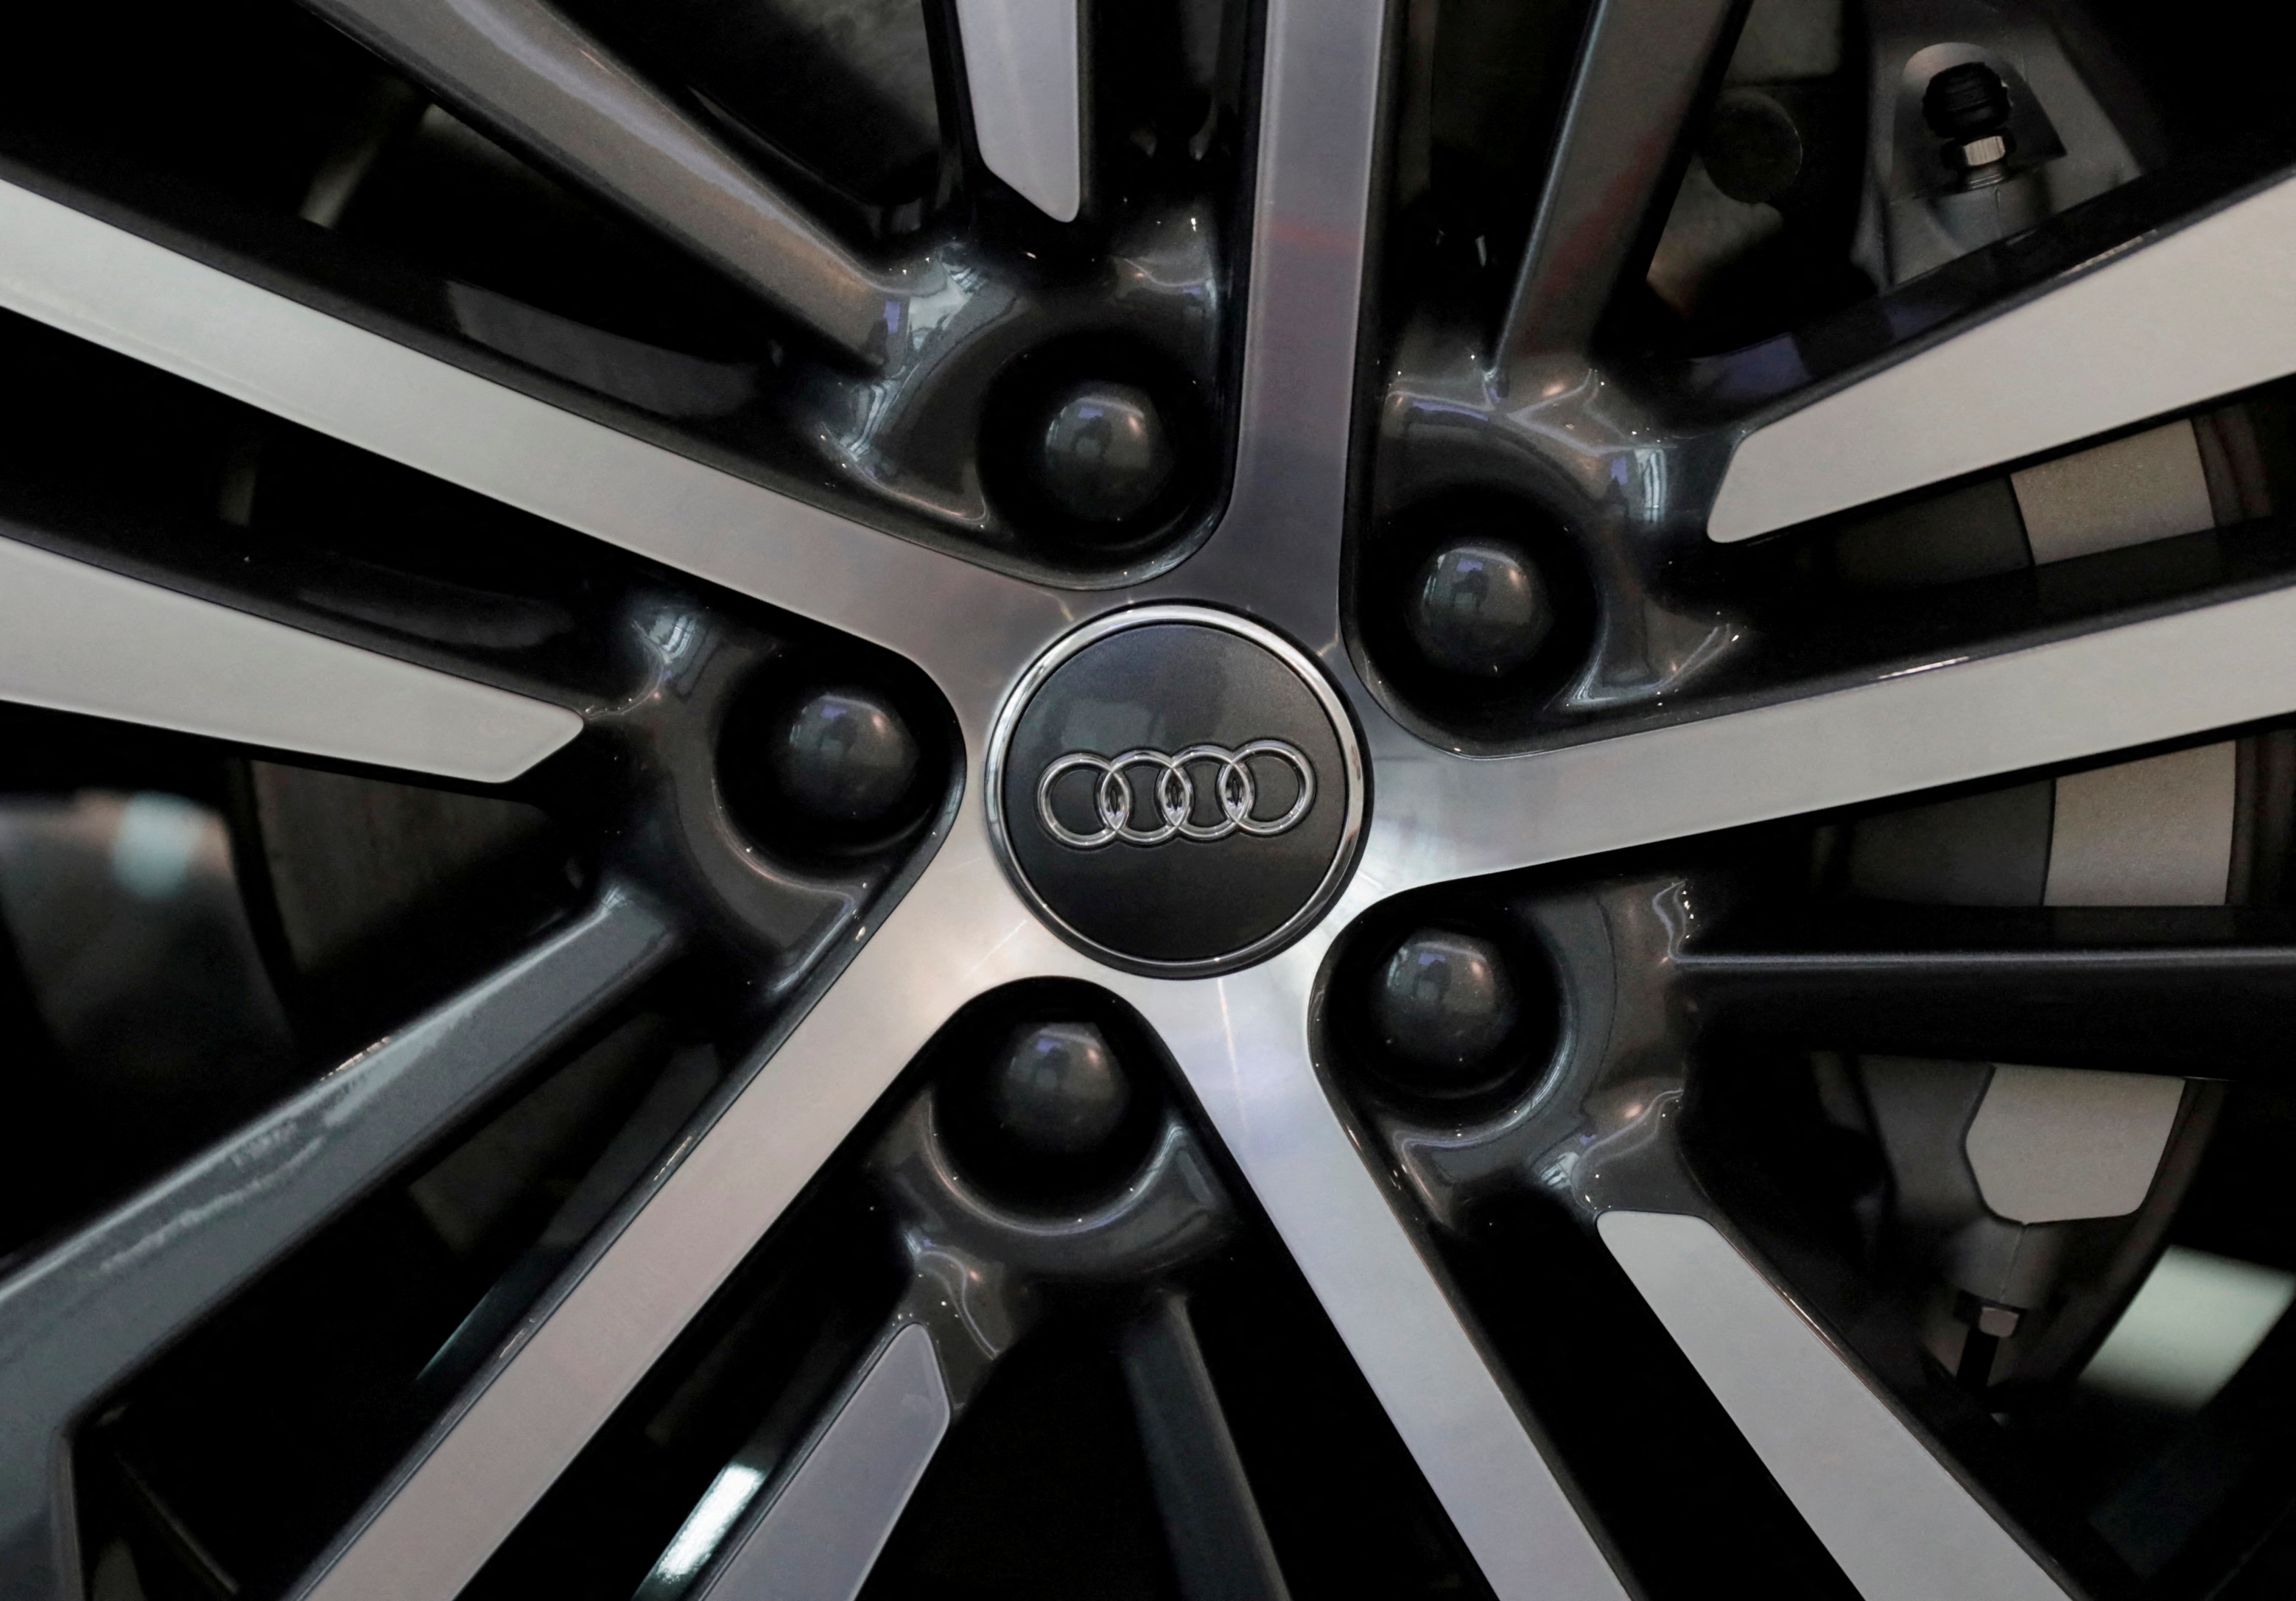 The logo of German car manufacturer Audi is seen on a tyre rim a Audi Q5 2.0 during a media tour in San Jose Chiapa